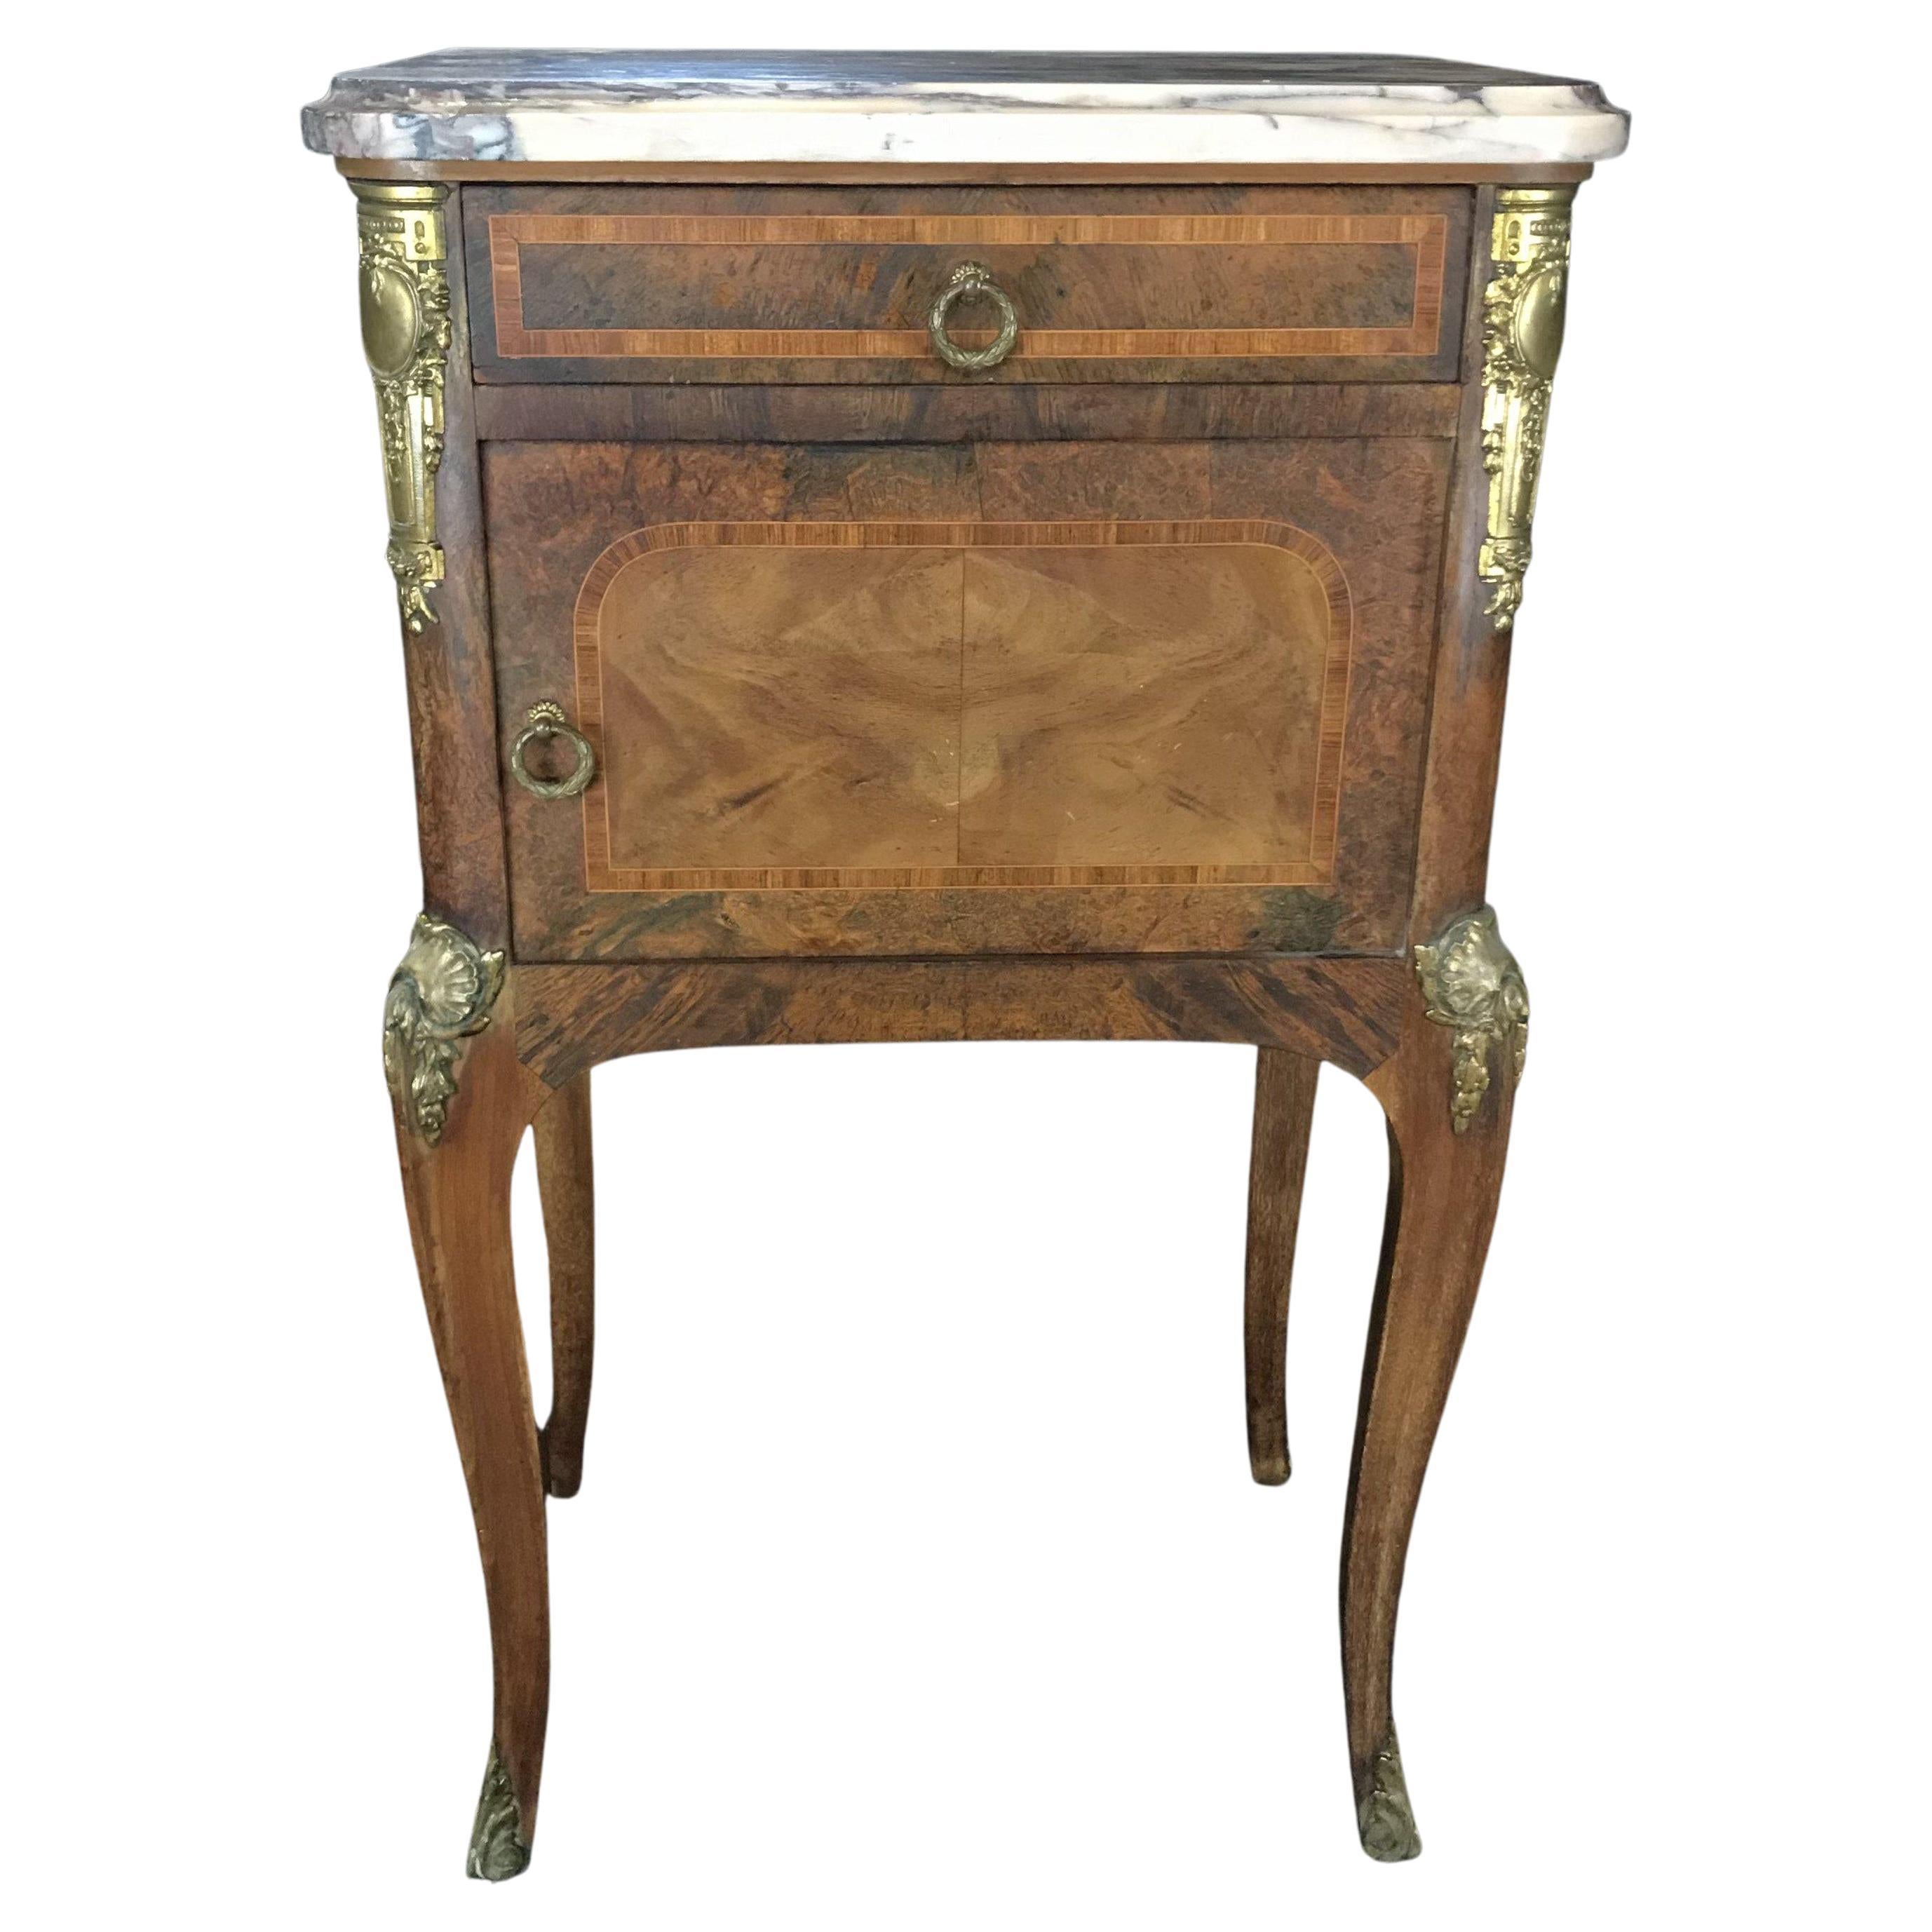 Special French 19th Century Inlaid Marble Top Nightstand or Side Table For Sale